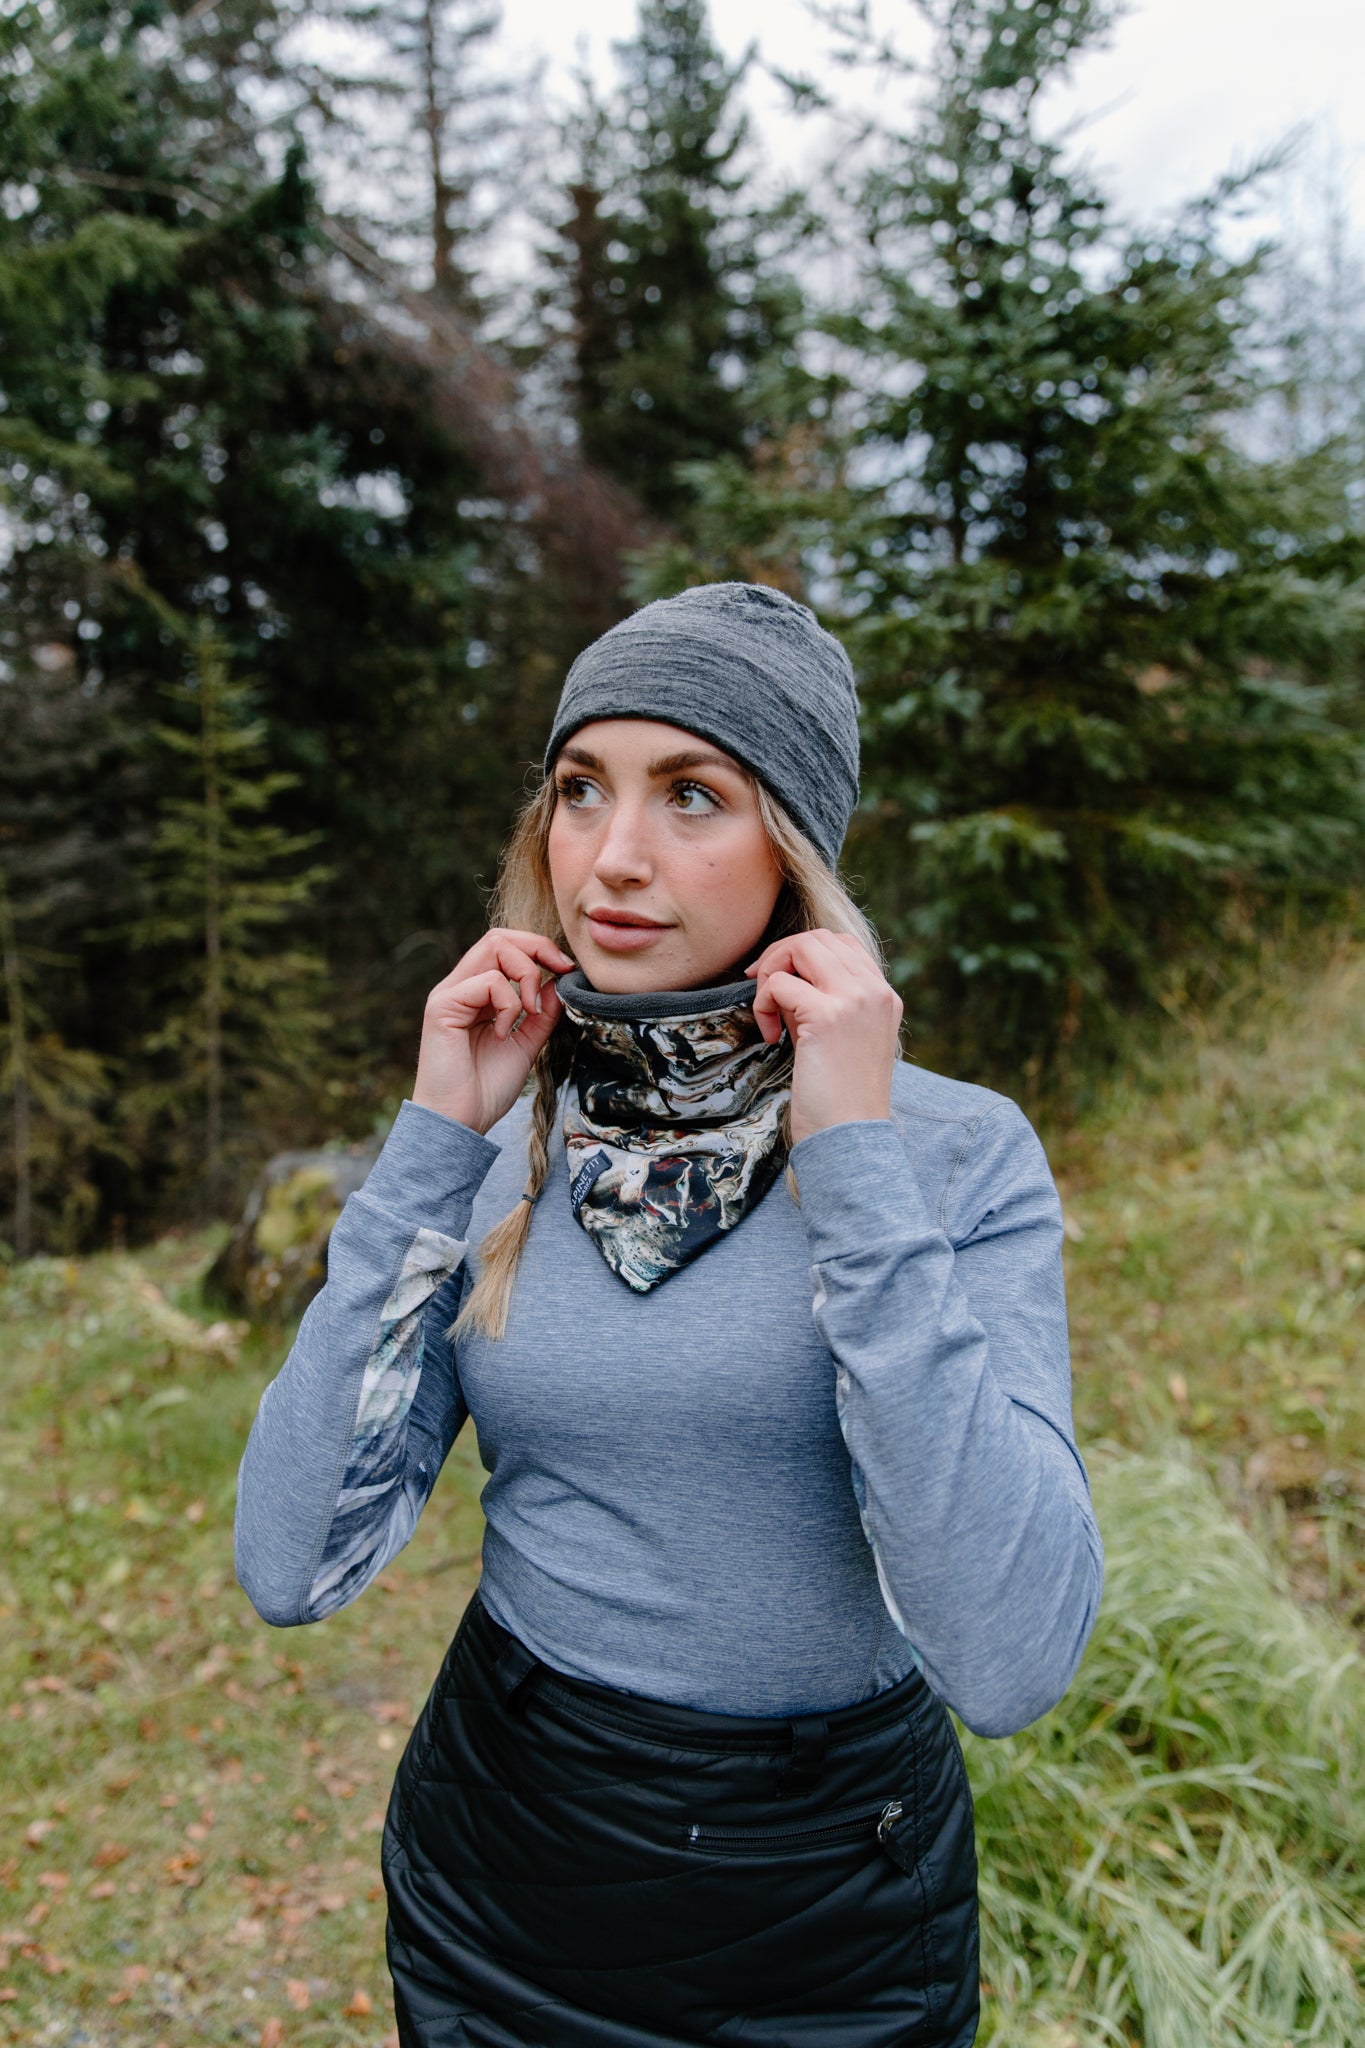 Going for a Hike? Here's the Best Hiking Clothes for Women